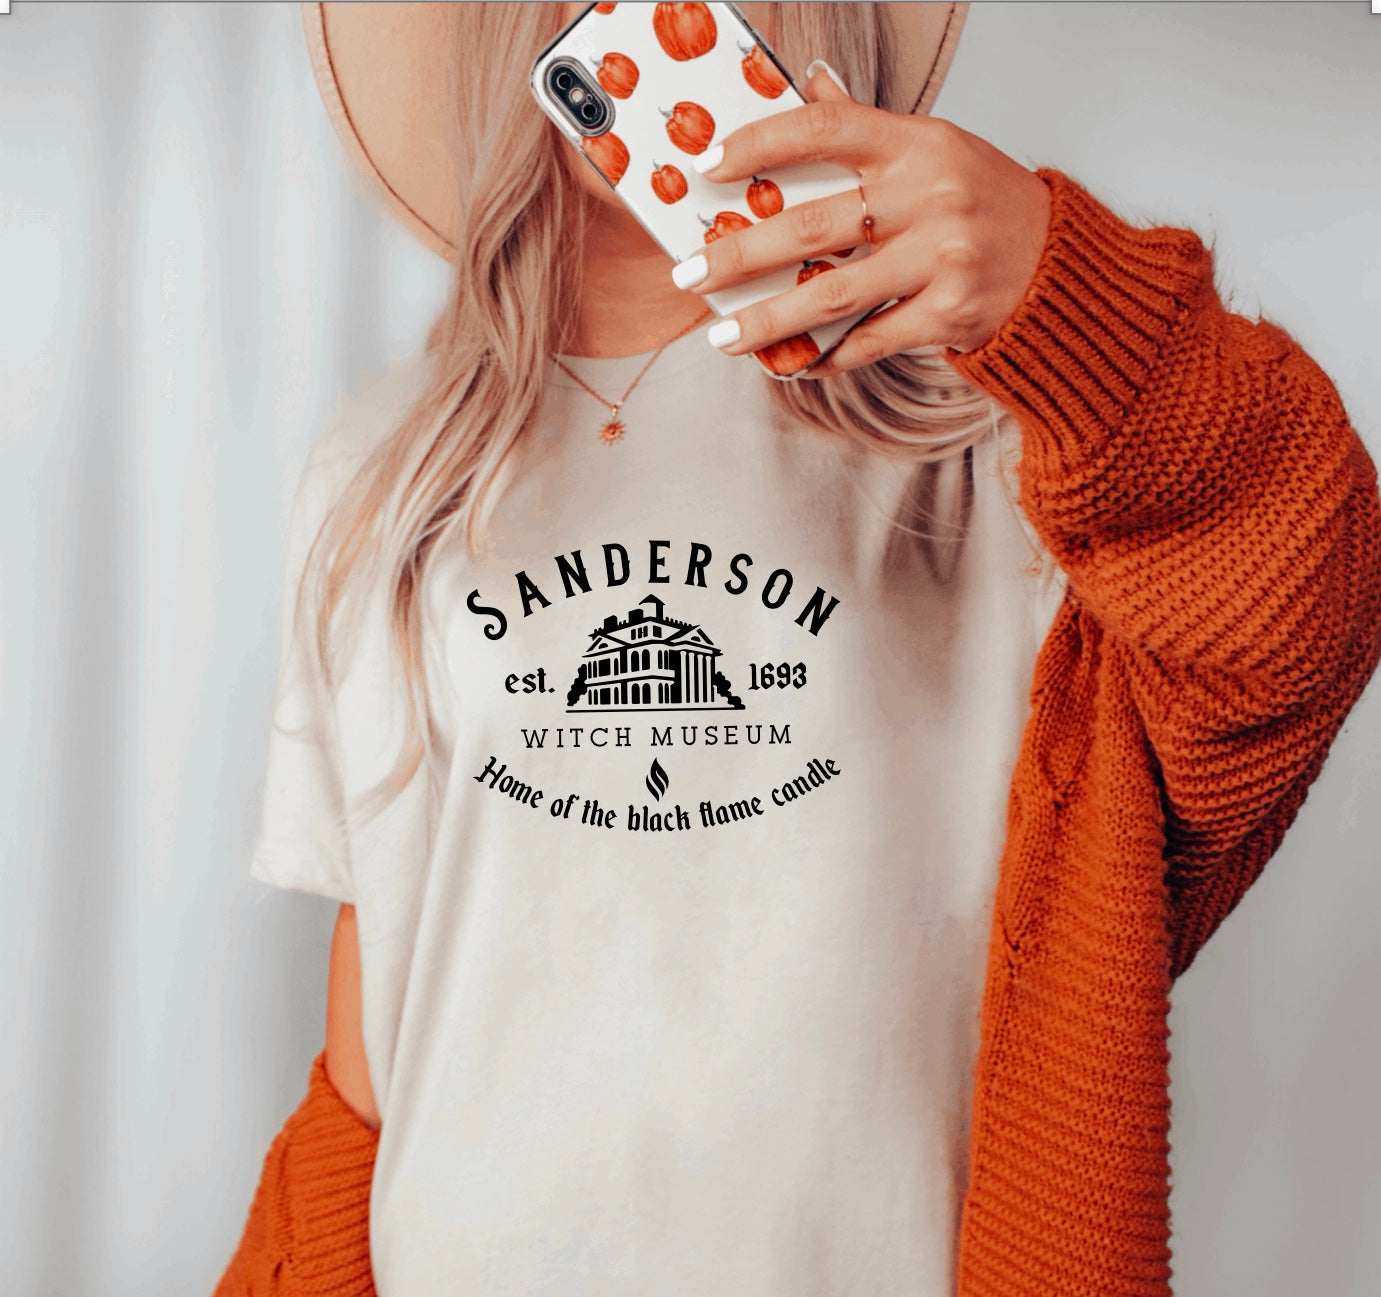 Sanderson witch museum home of the black flame candle t-shirt 